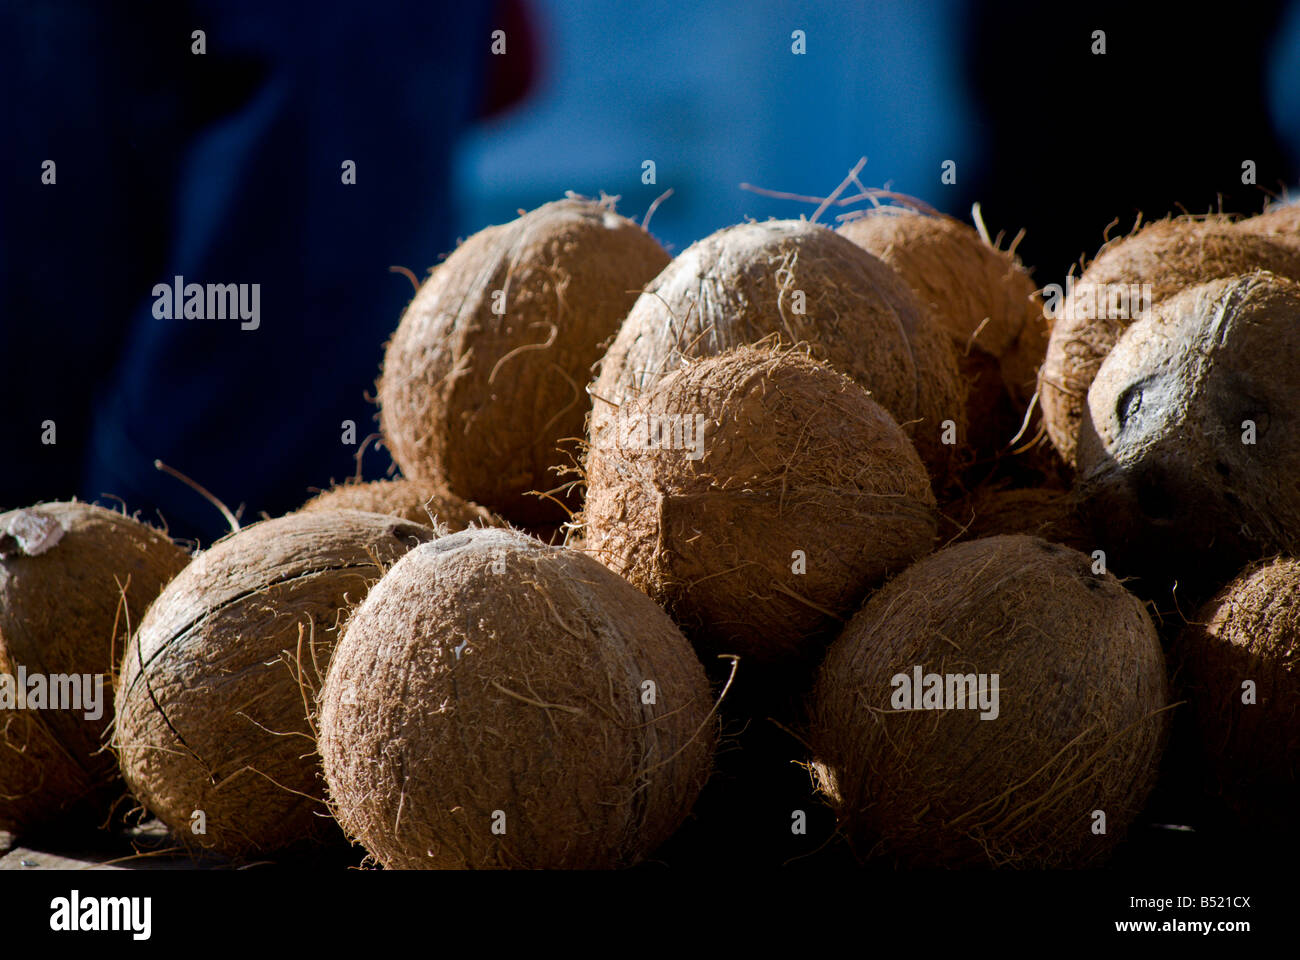 Husked coconuts sit in a stack Stock Photo